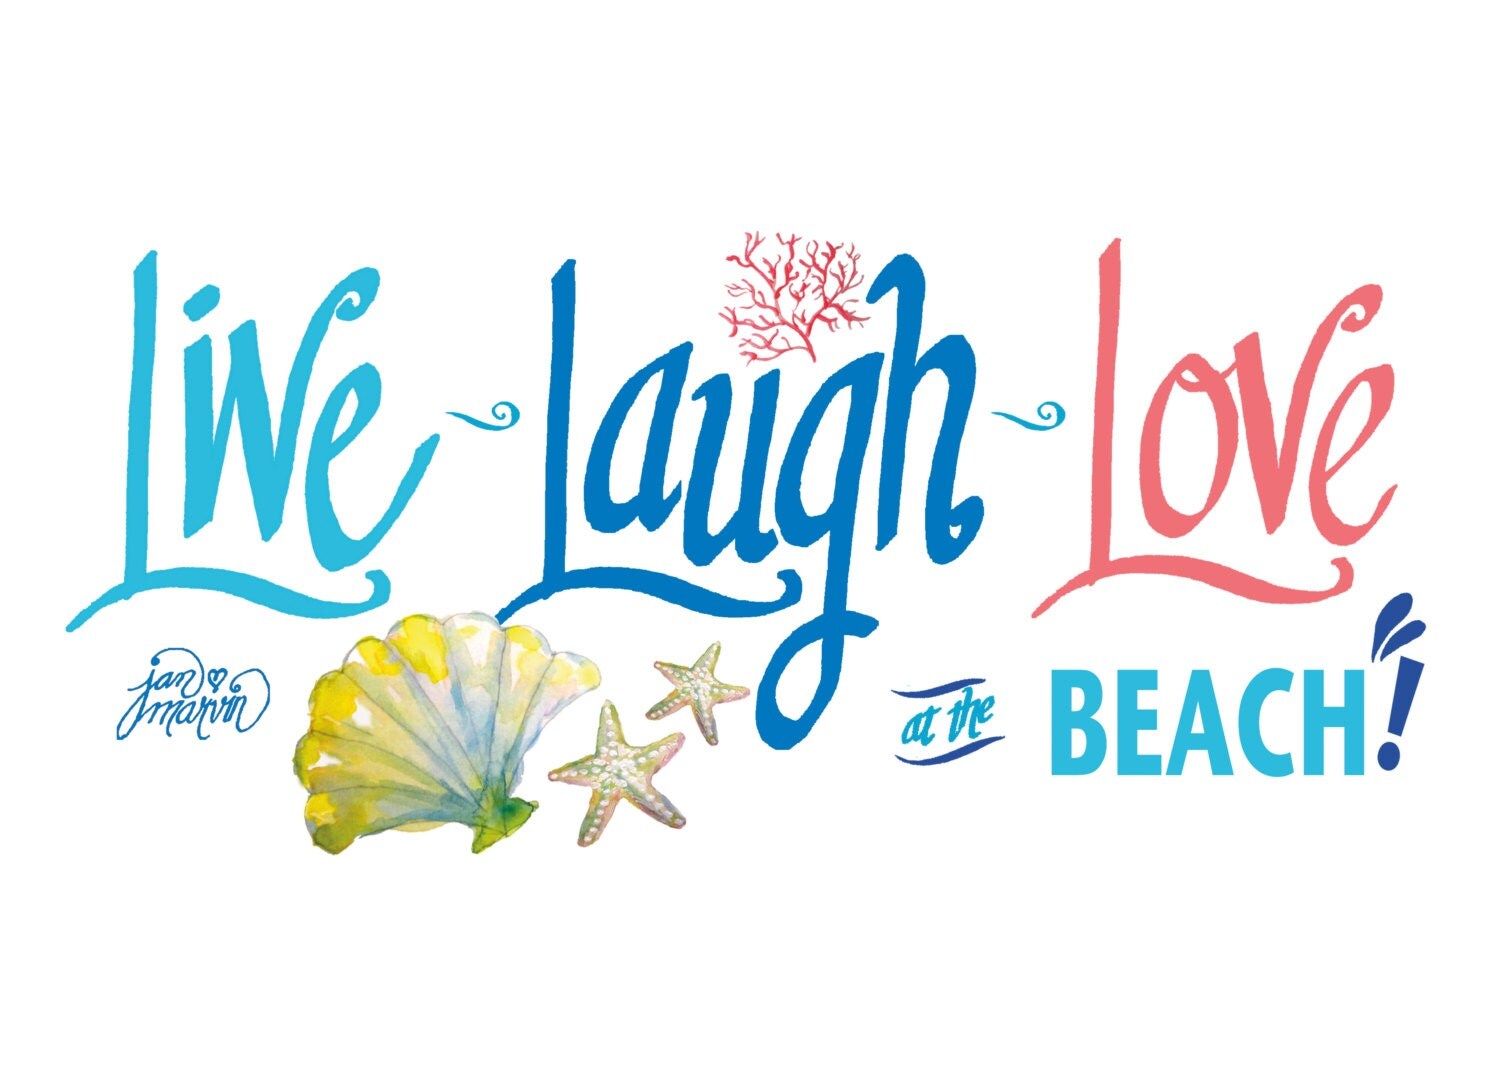 Live Laugh Love at the beach Quote Art Print with shells and